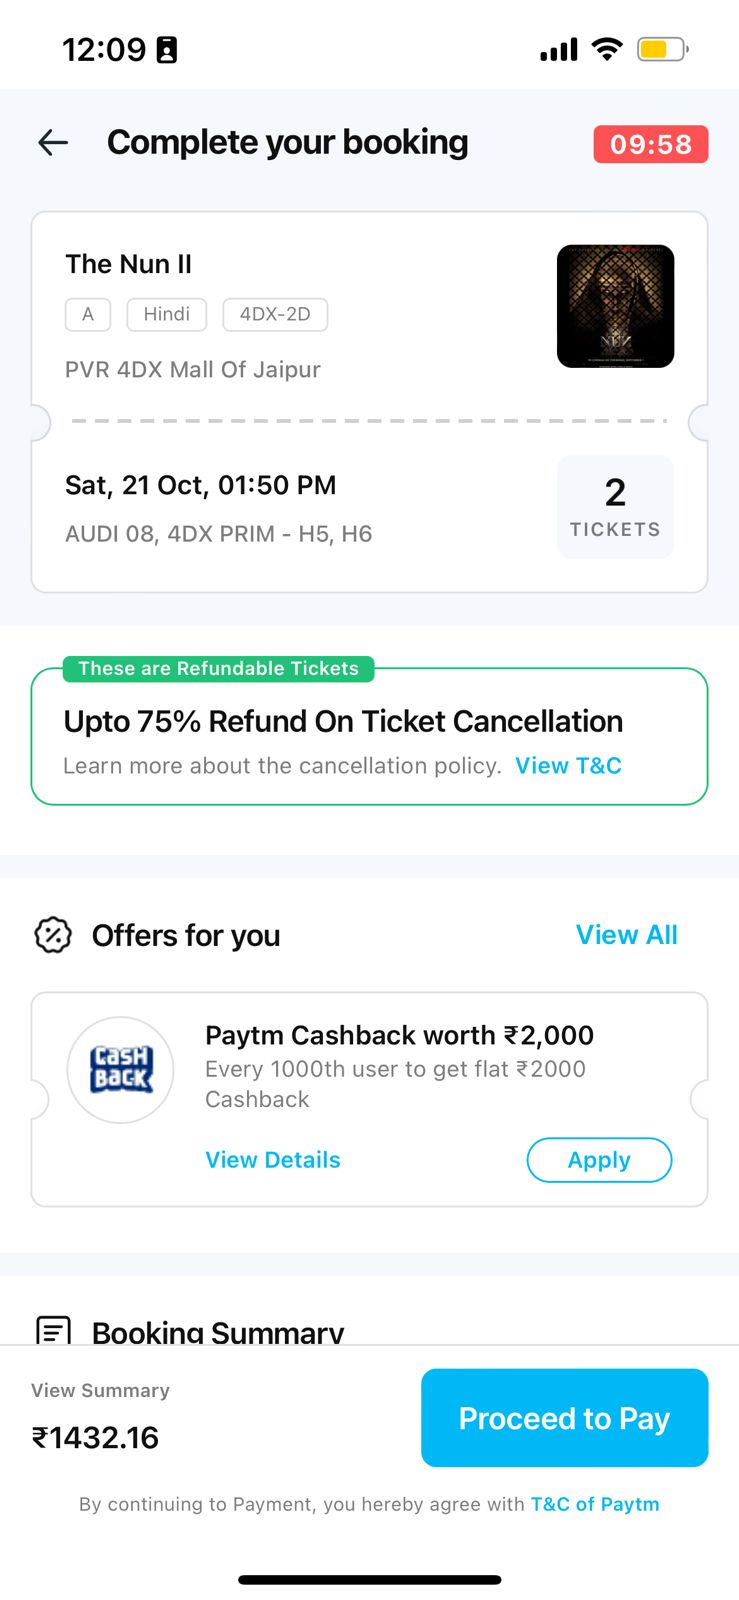 How to book Movie tickets in Paytm